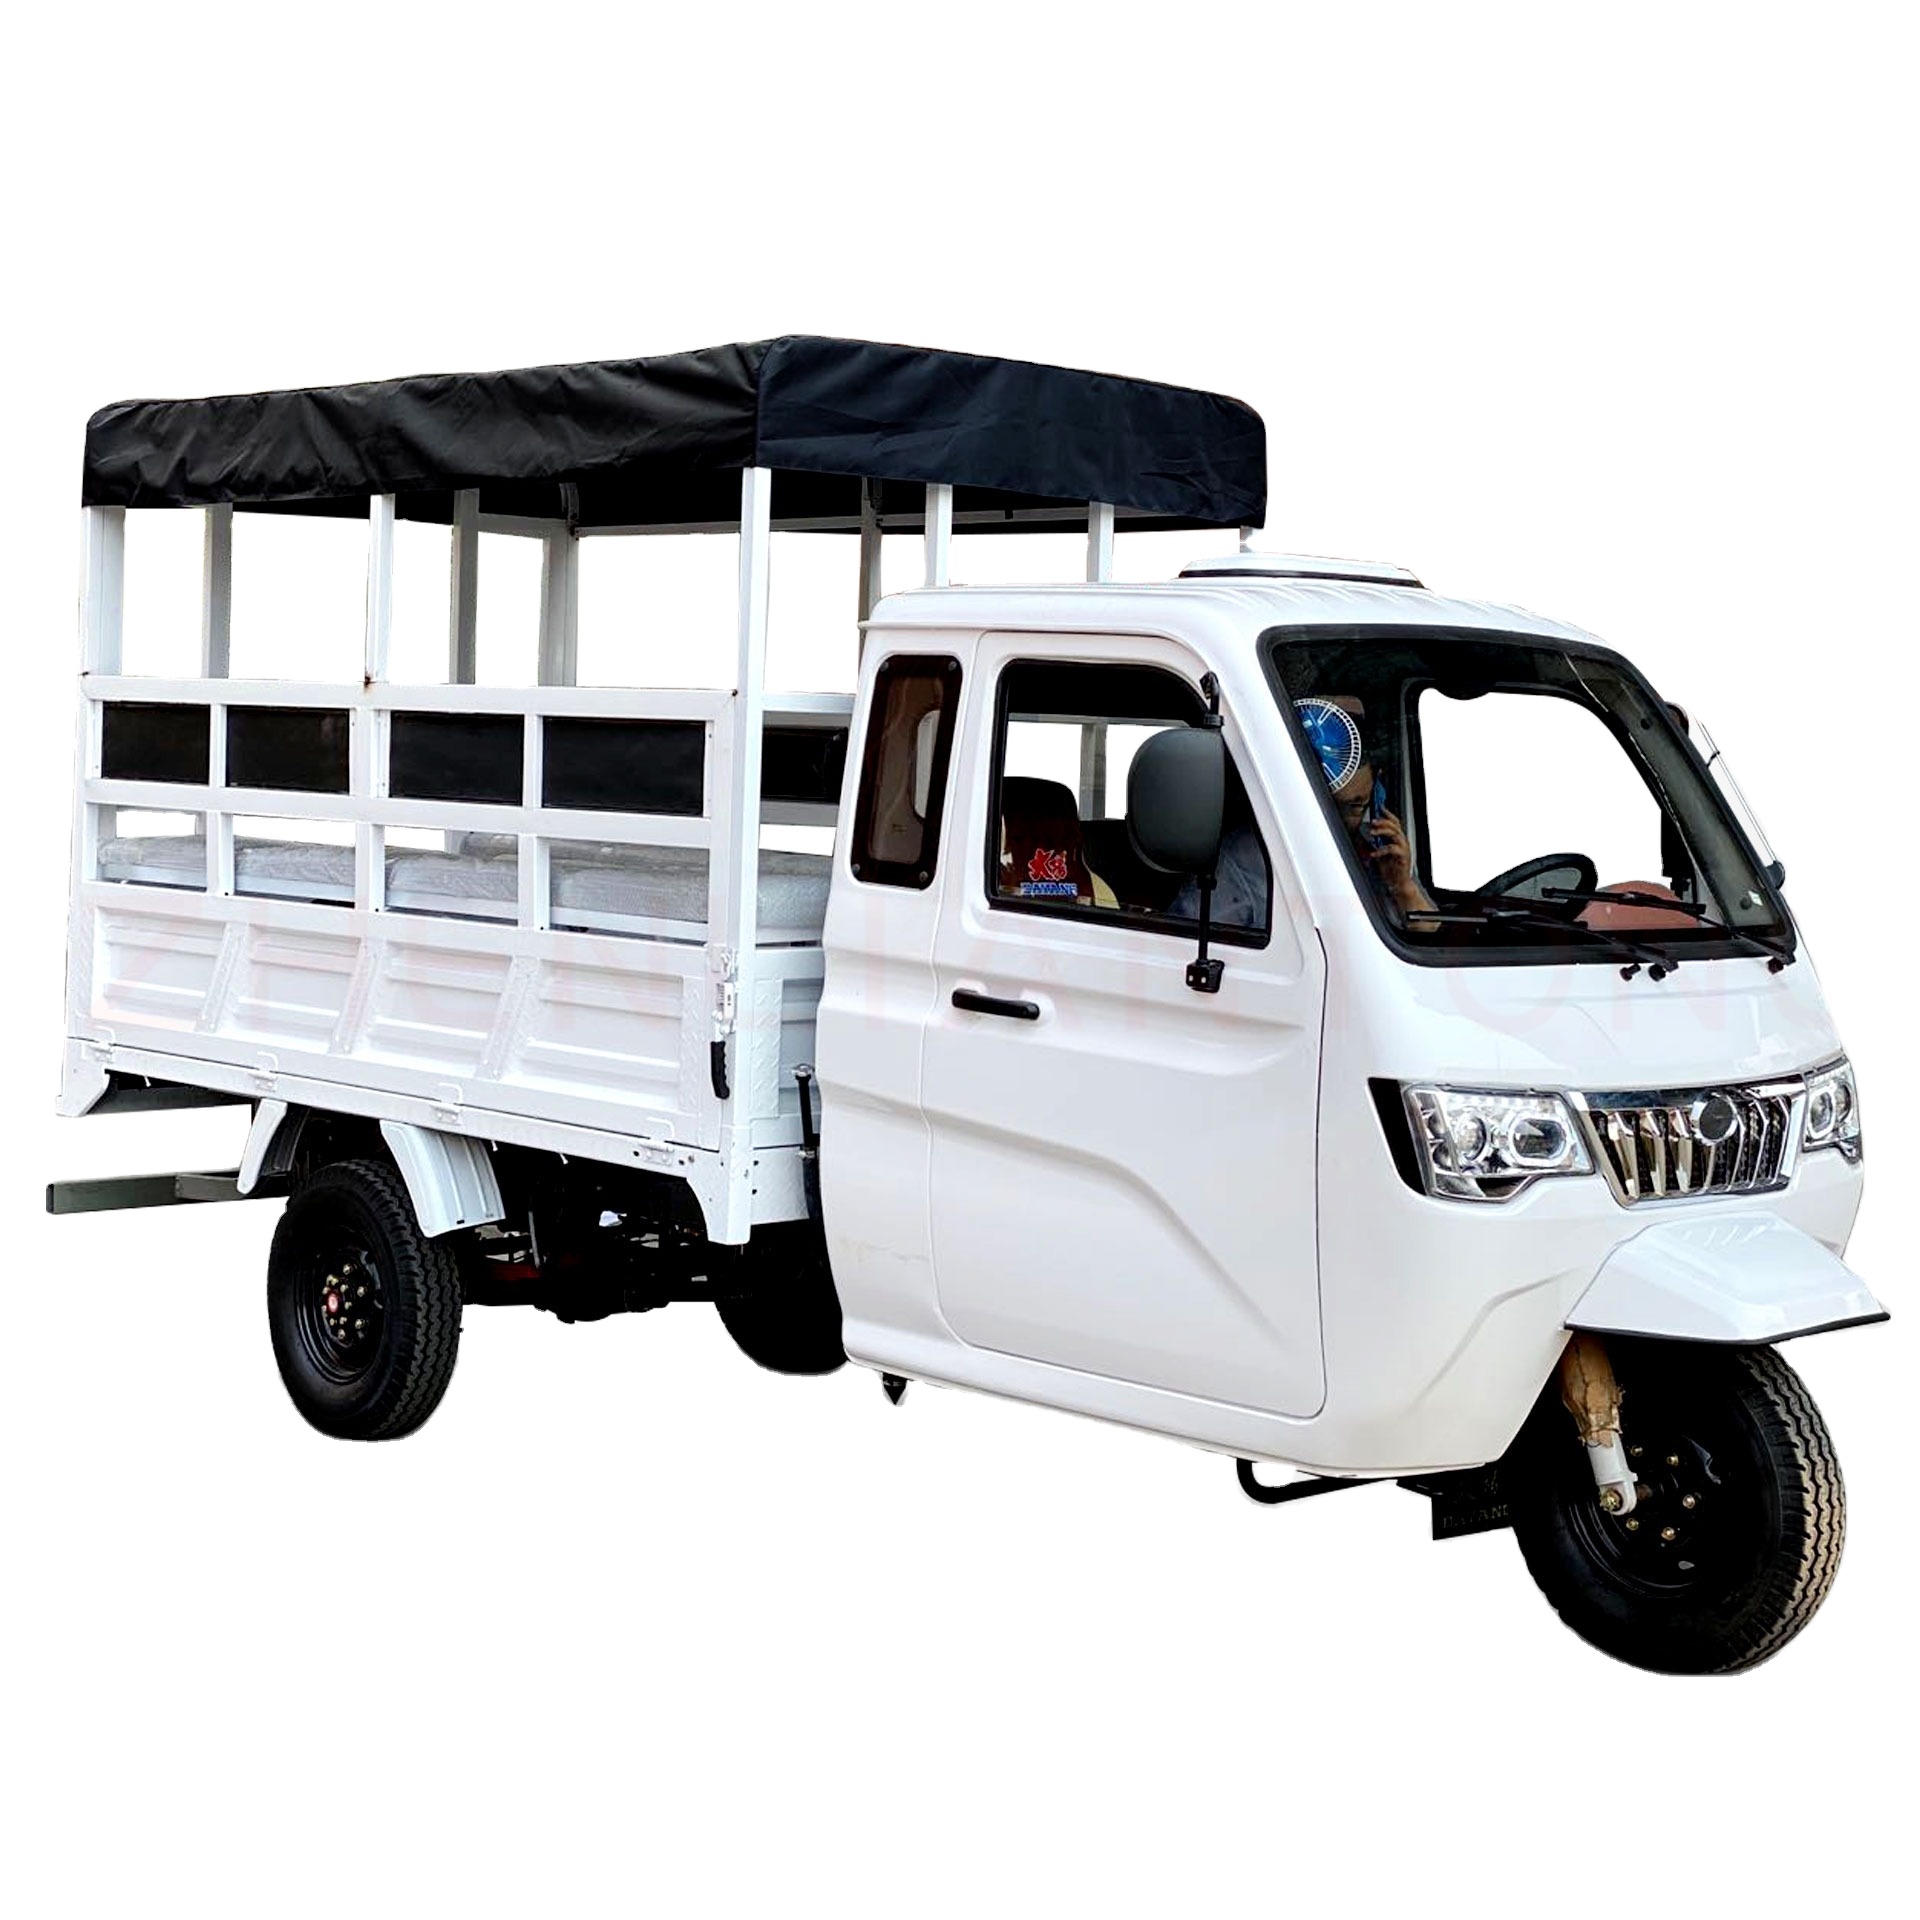 2021 new semi cabin Motorized Cargo Tricycle Enclosed cabin and heavy loading cargo tricycle with plastic cargo cover